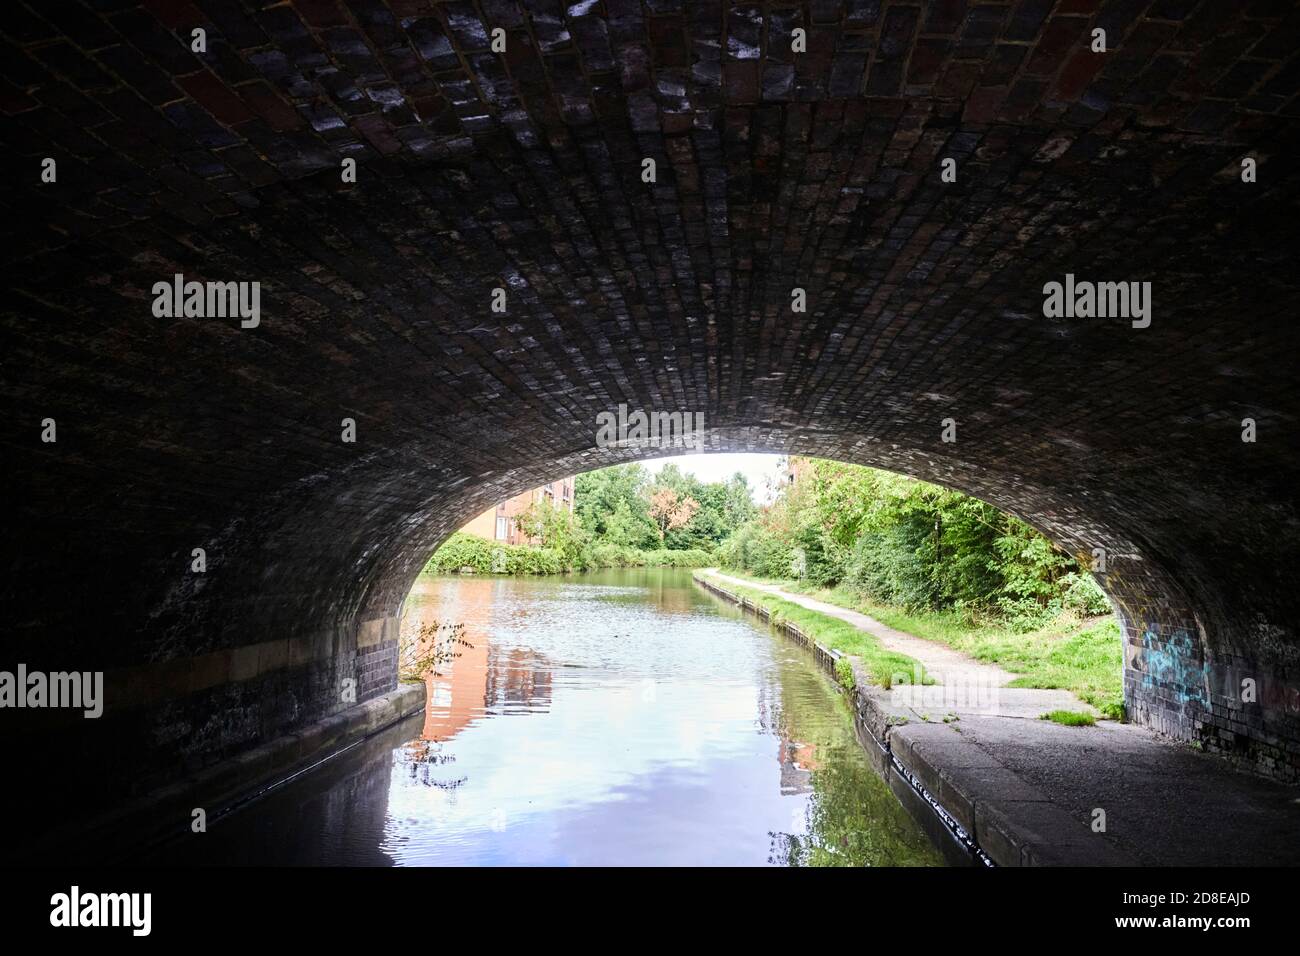 Bridge number 21 near Nuneaton on the Grand Union Canal showing the parallel brickwork construction Stock Photo